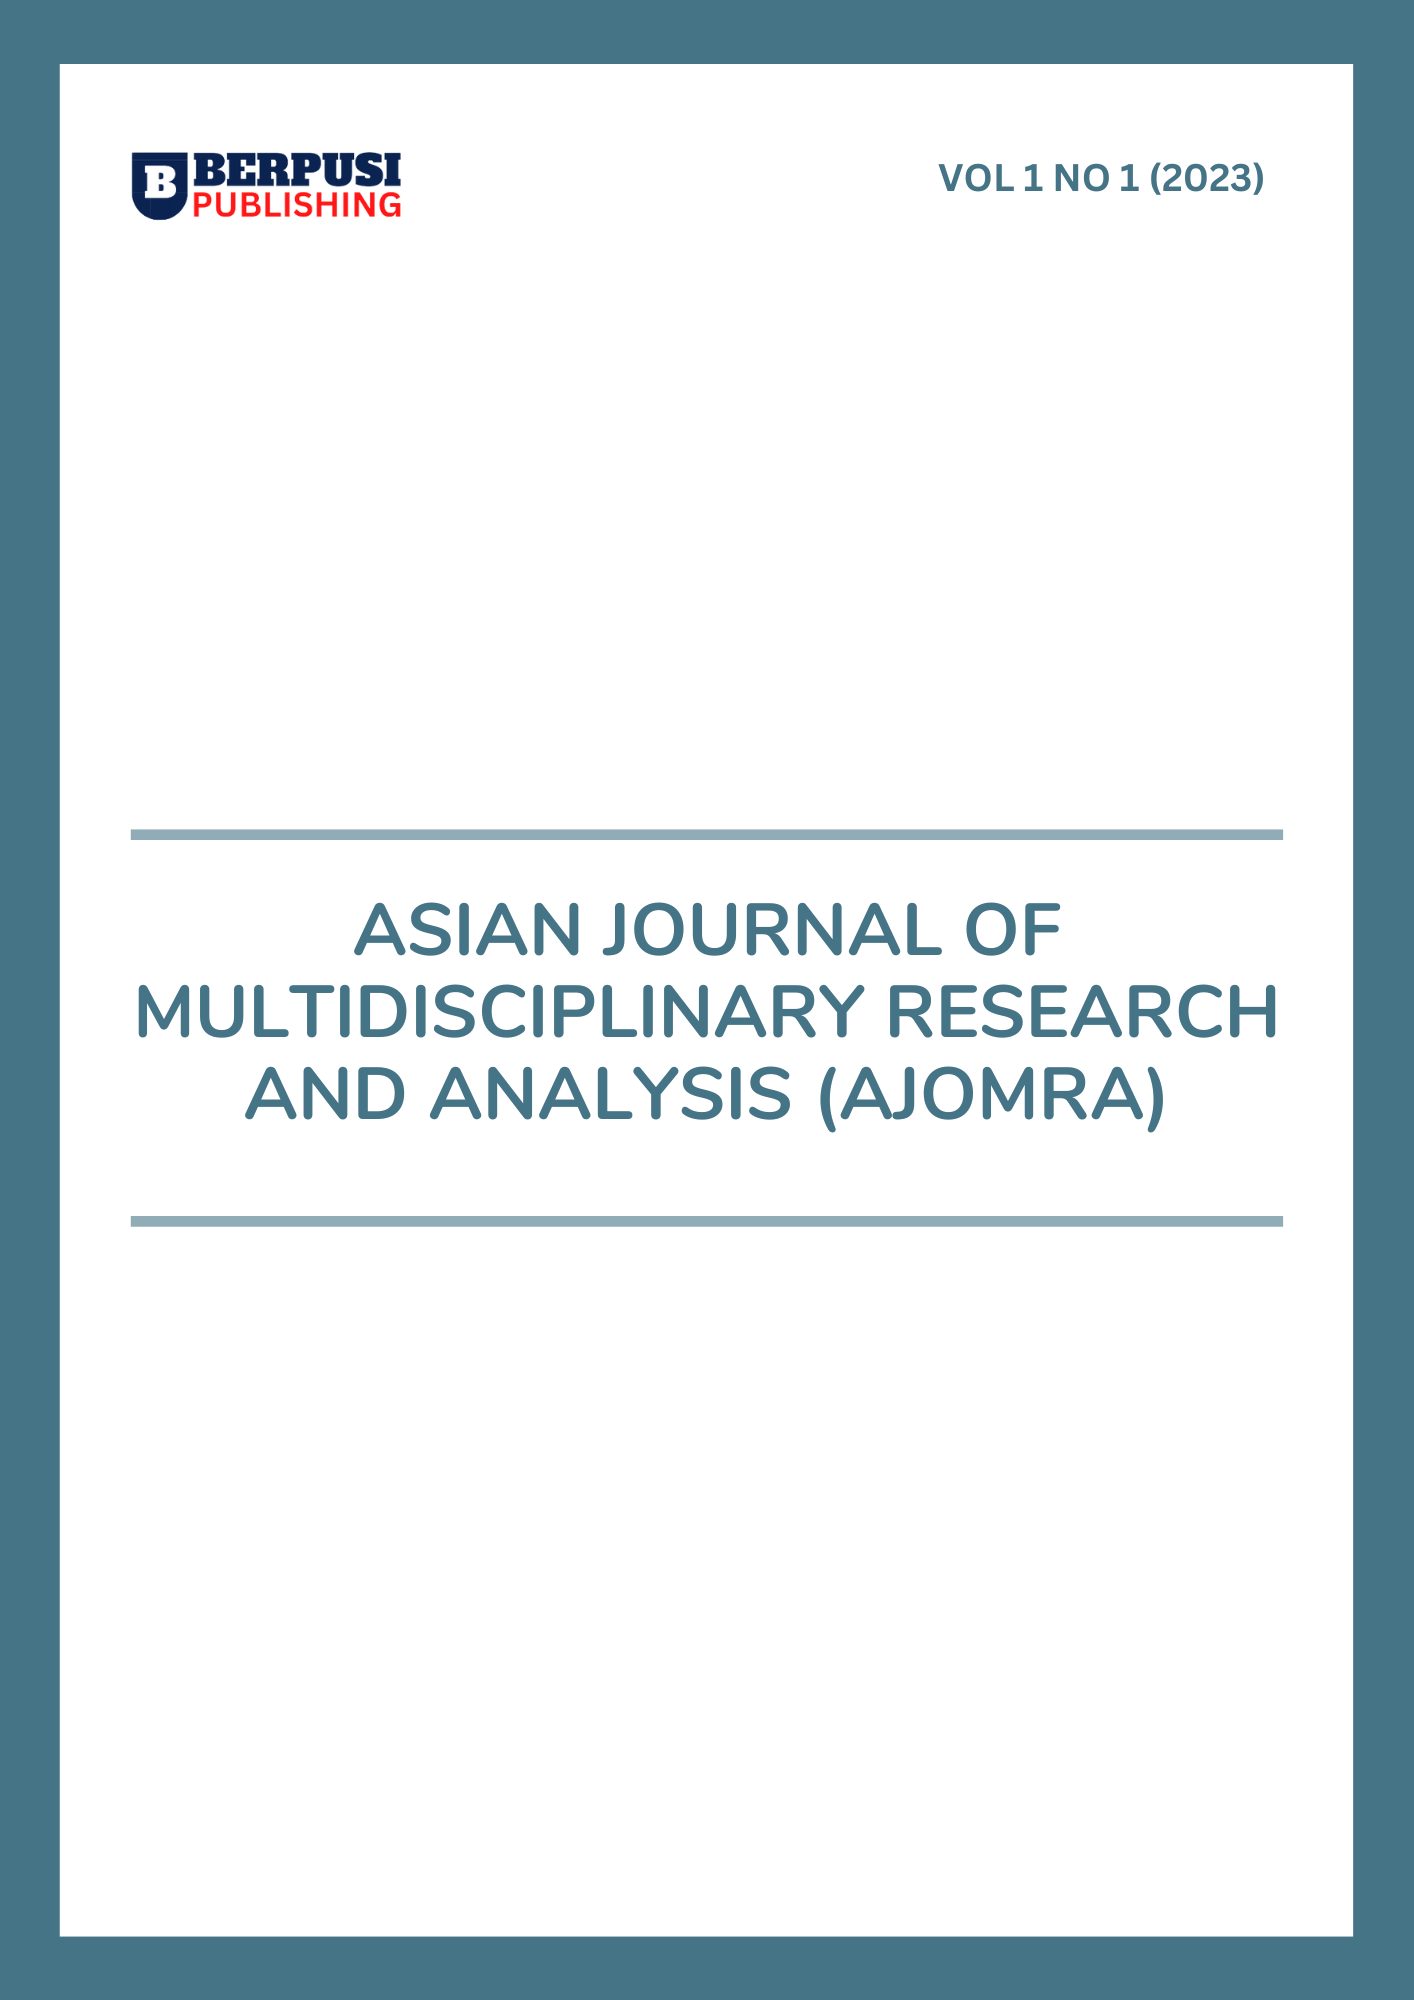 					View Vol. 1 No. 1 (2023): Asian Journal of Multidisciplinary Research and Analysis
				